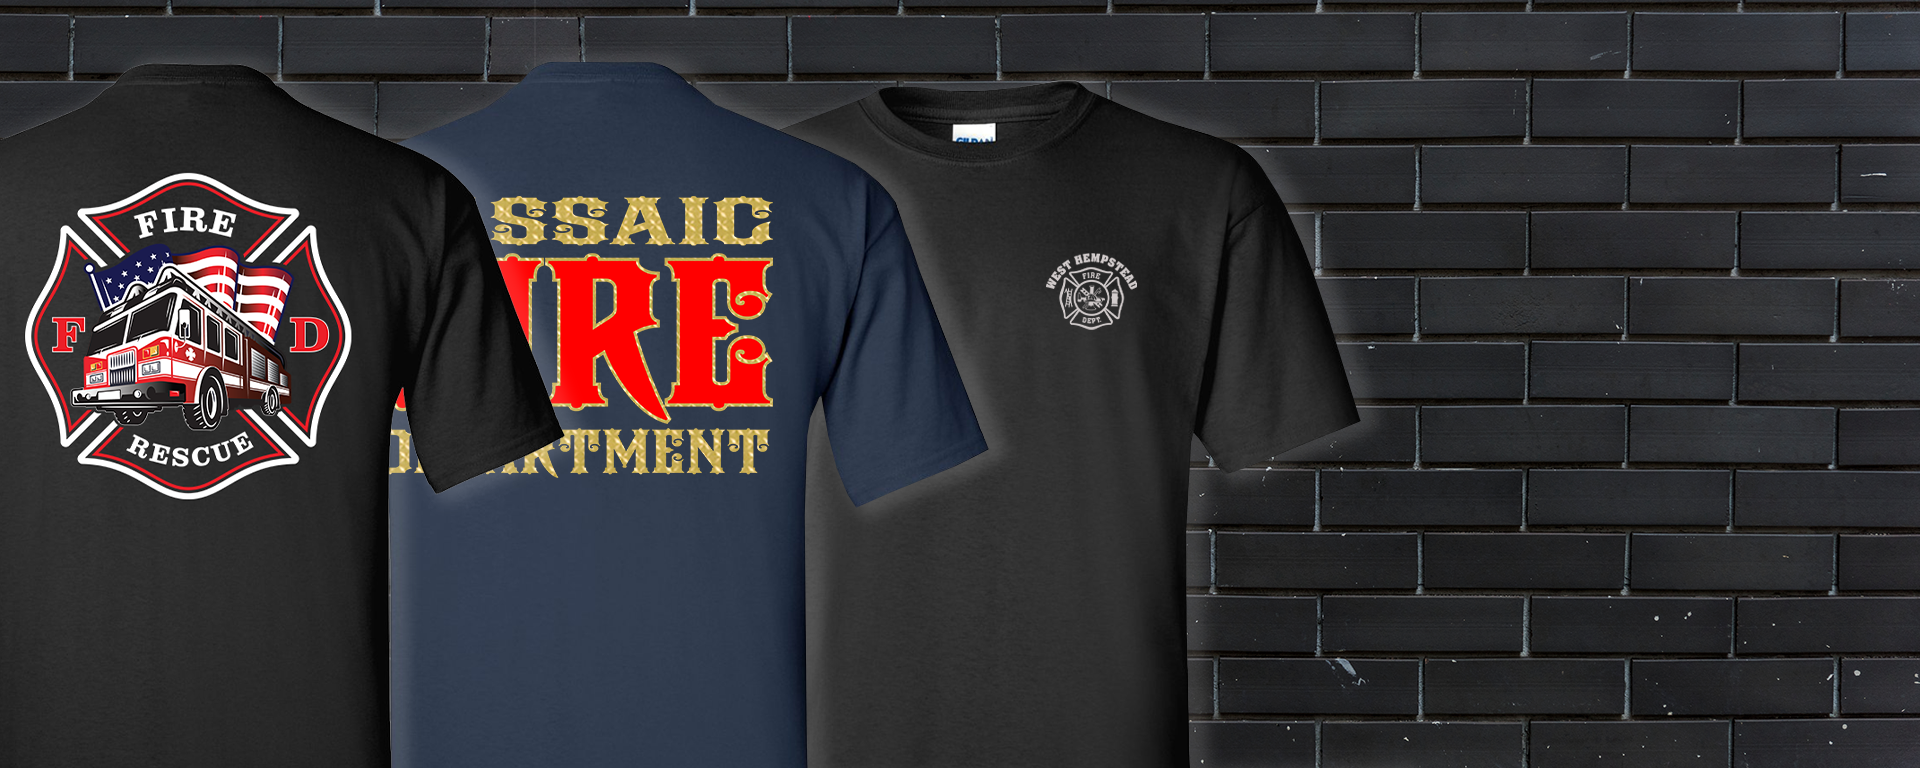 Firefighter Apparel & Accessories